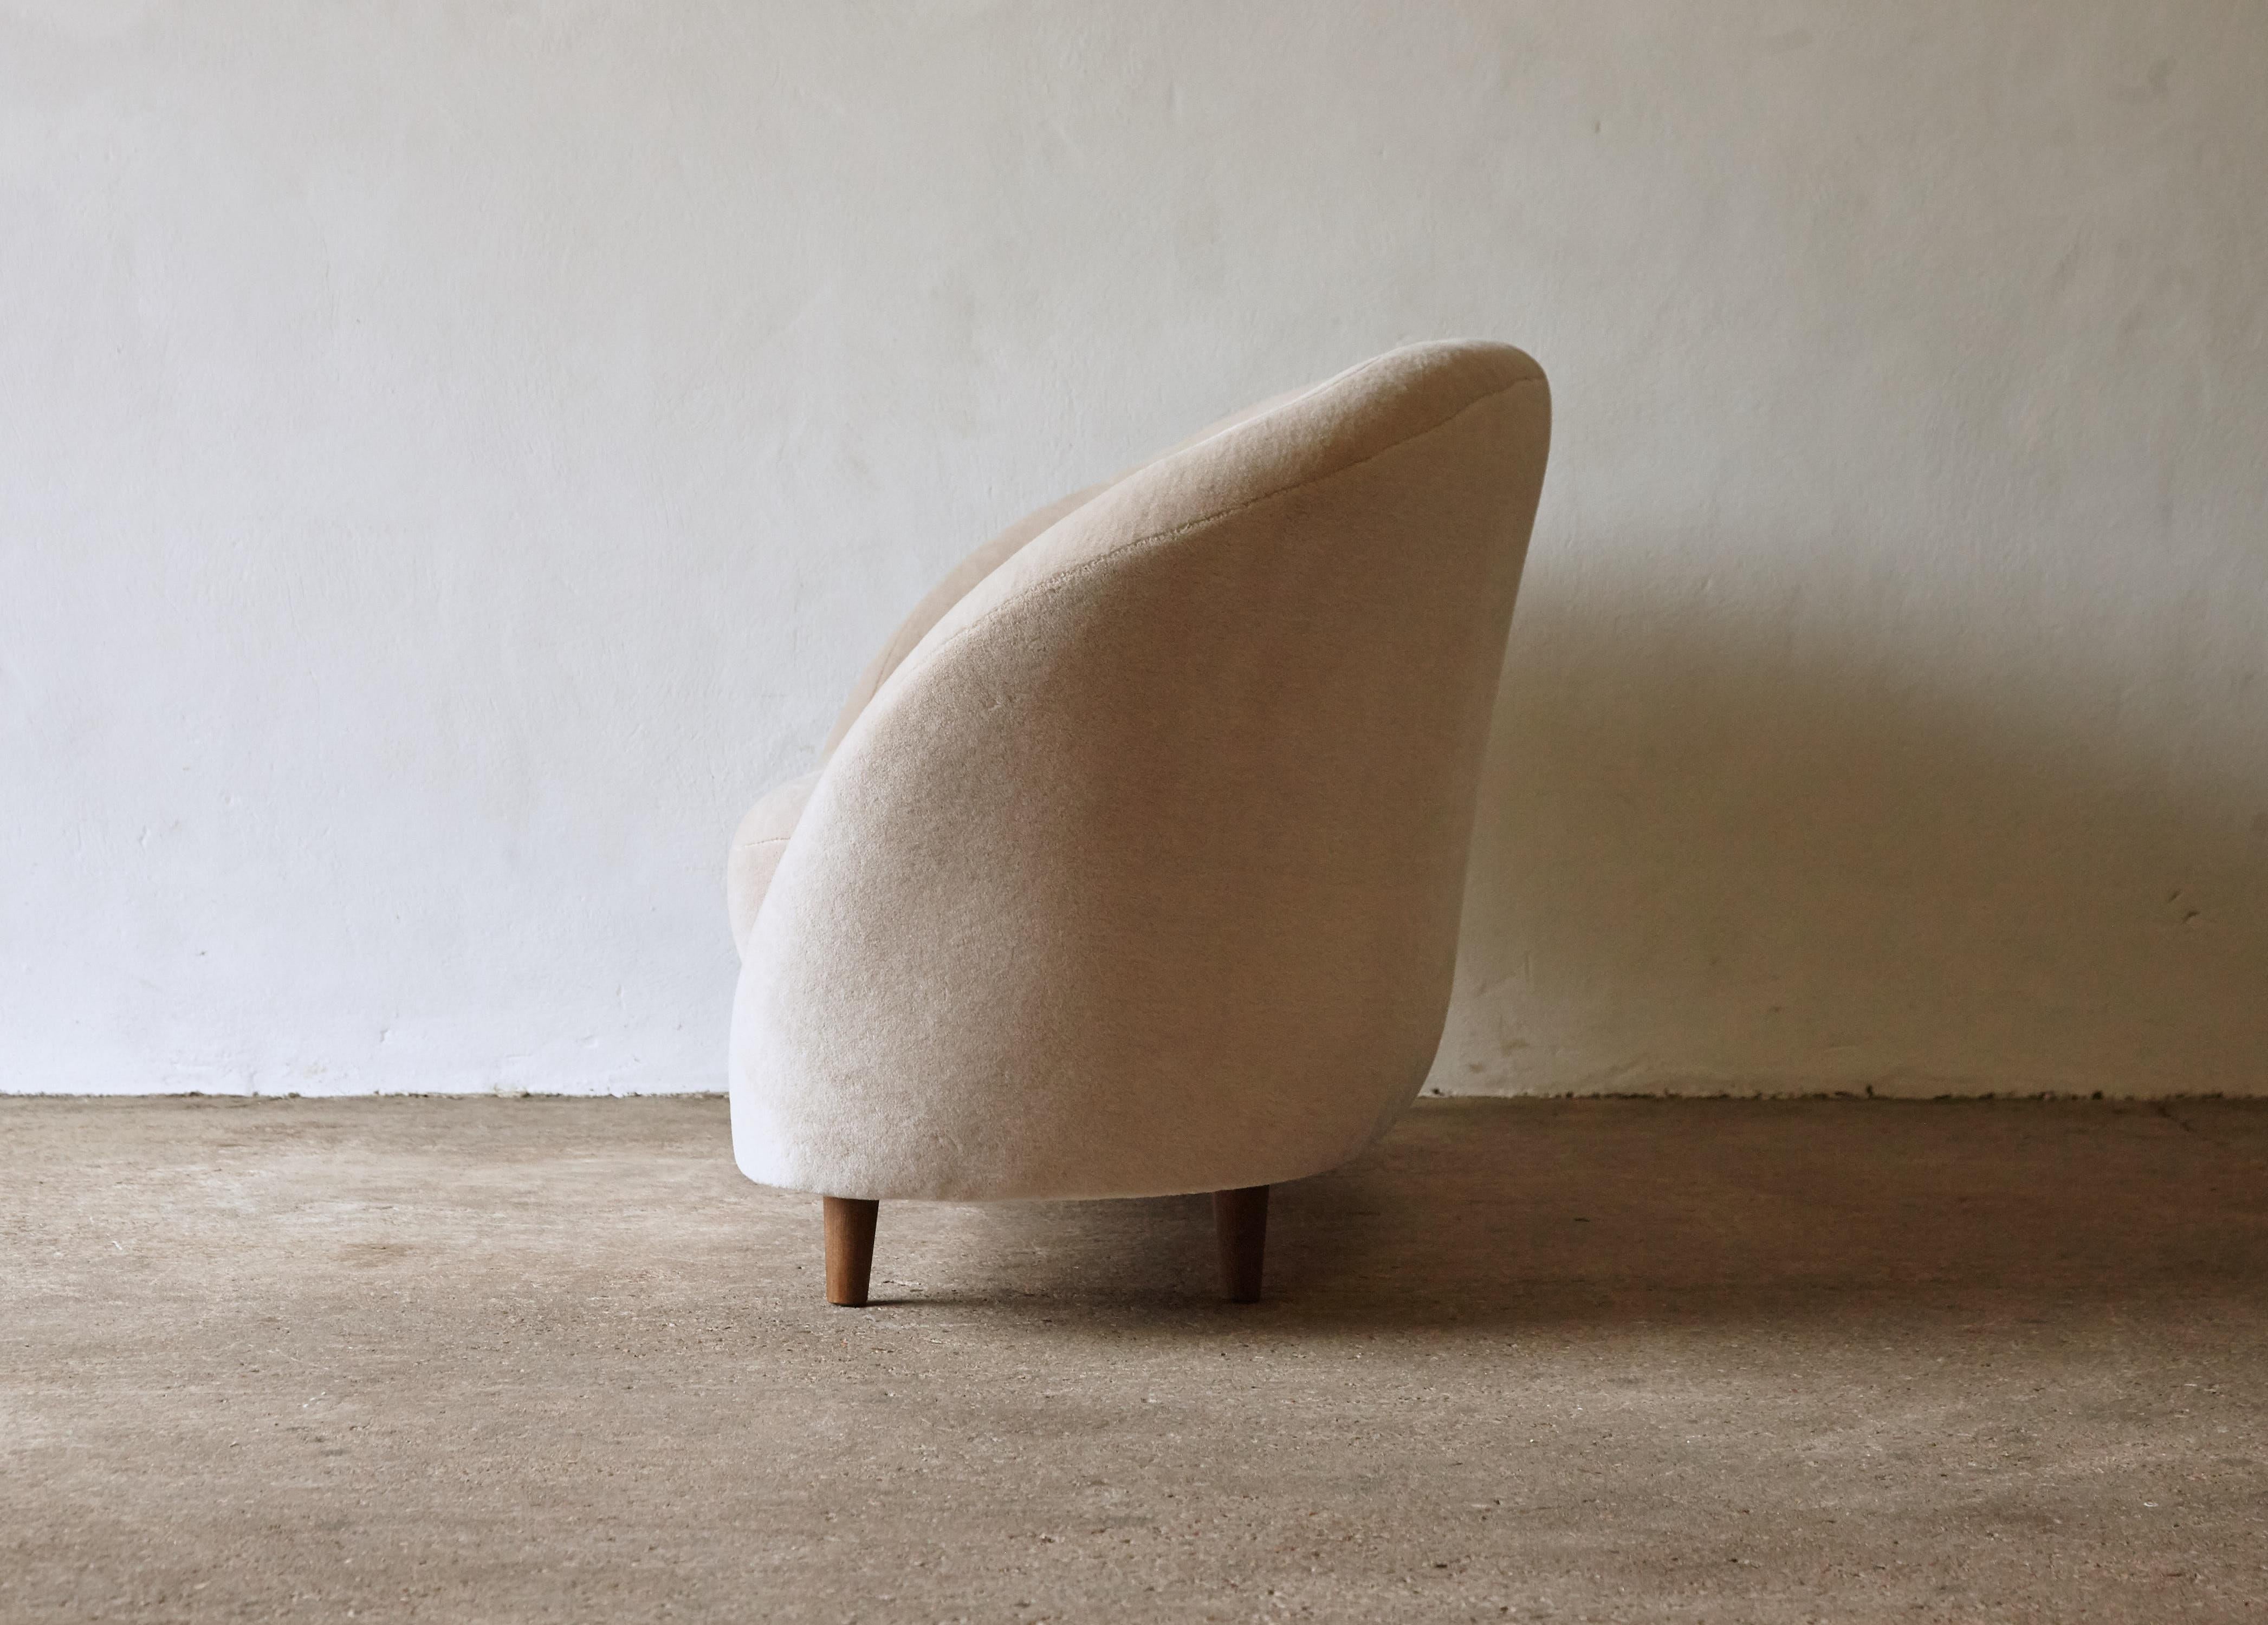 Fabric Curved Egg Shape Sofa, in the Style of Ico Parisi, Italy, 1950s / 60s For Sale